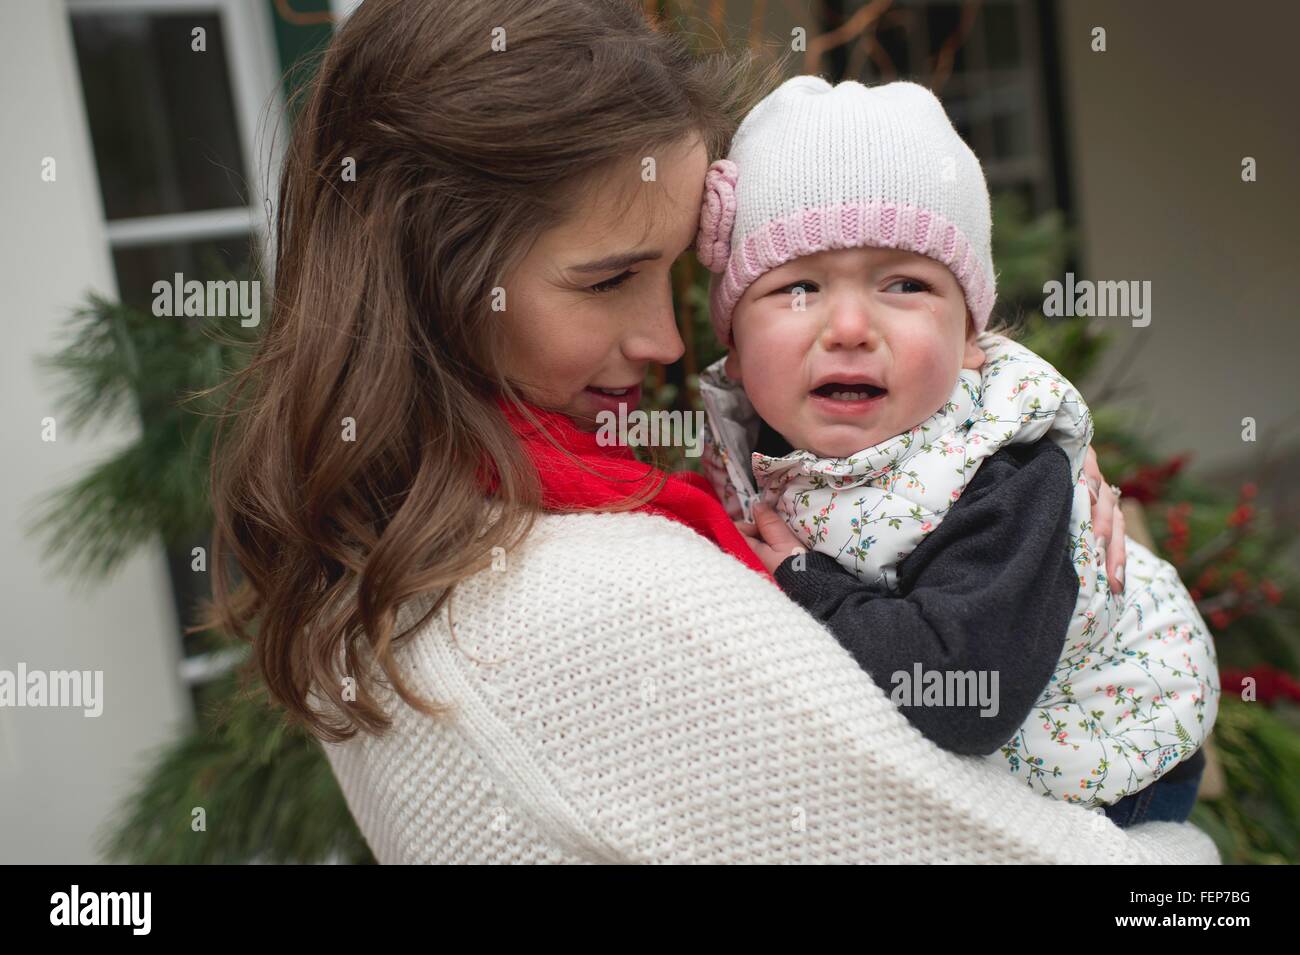 Young girl, crying, being consoled by mother, outdoors Stock Photo